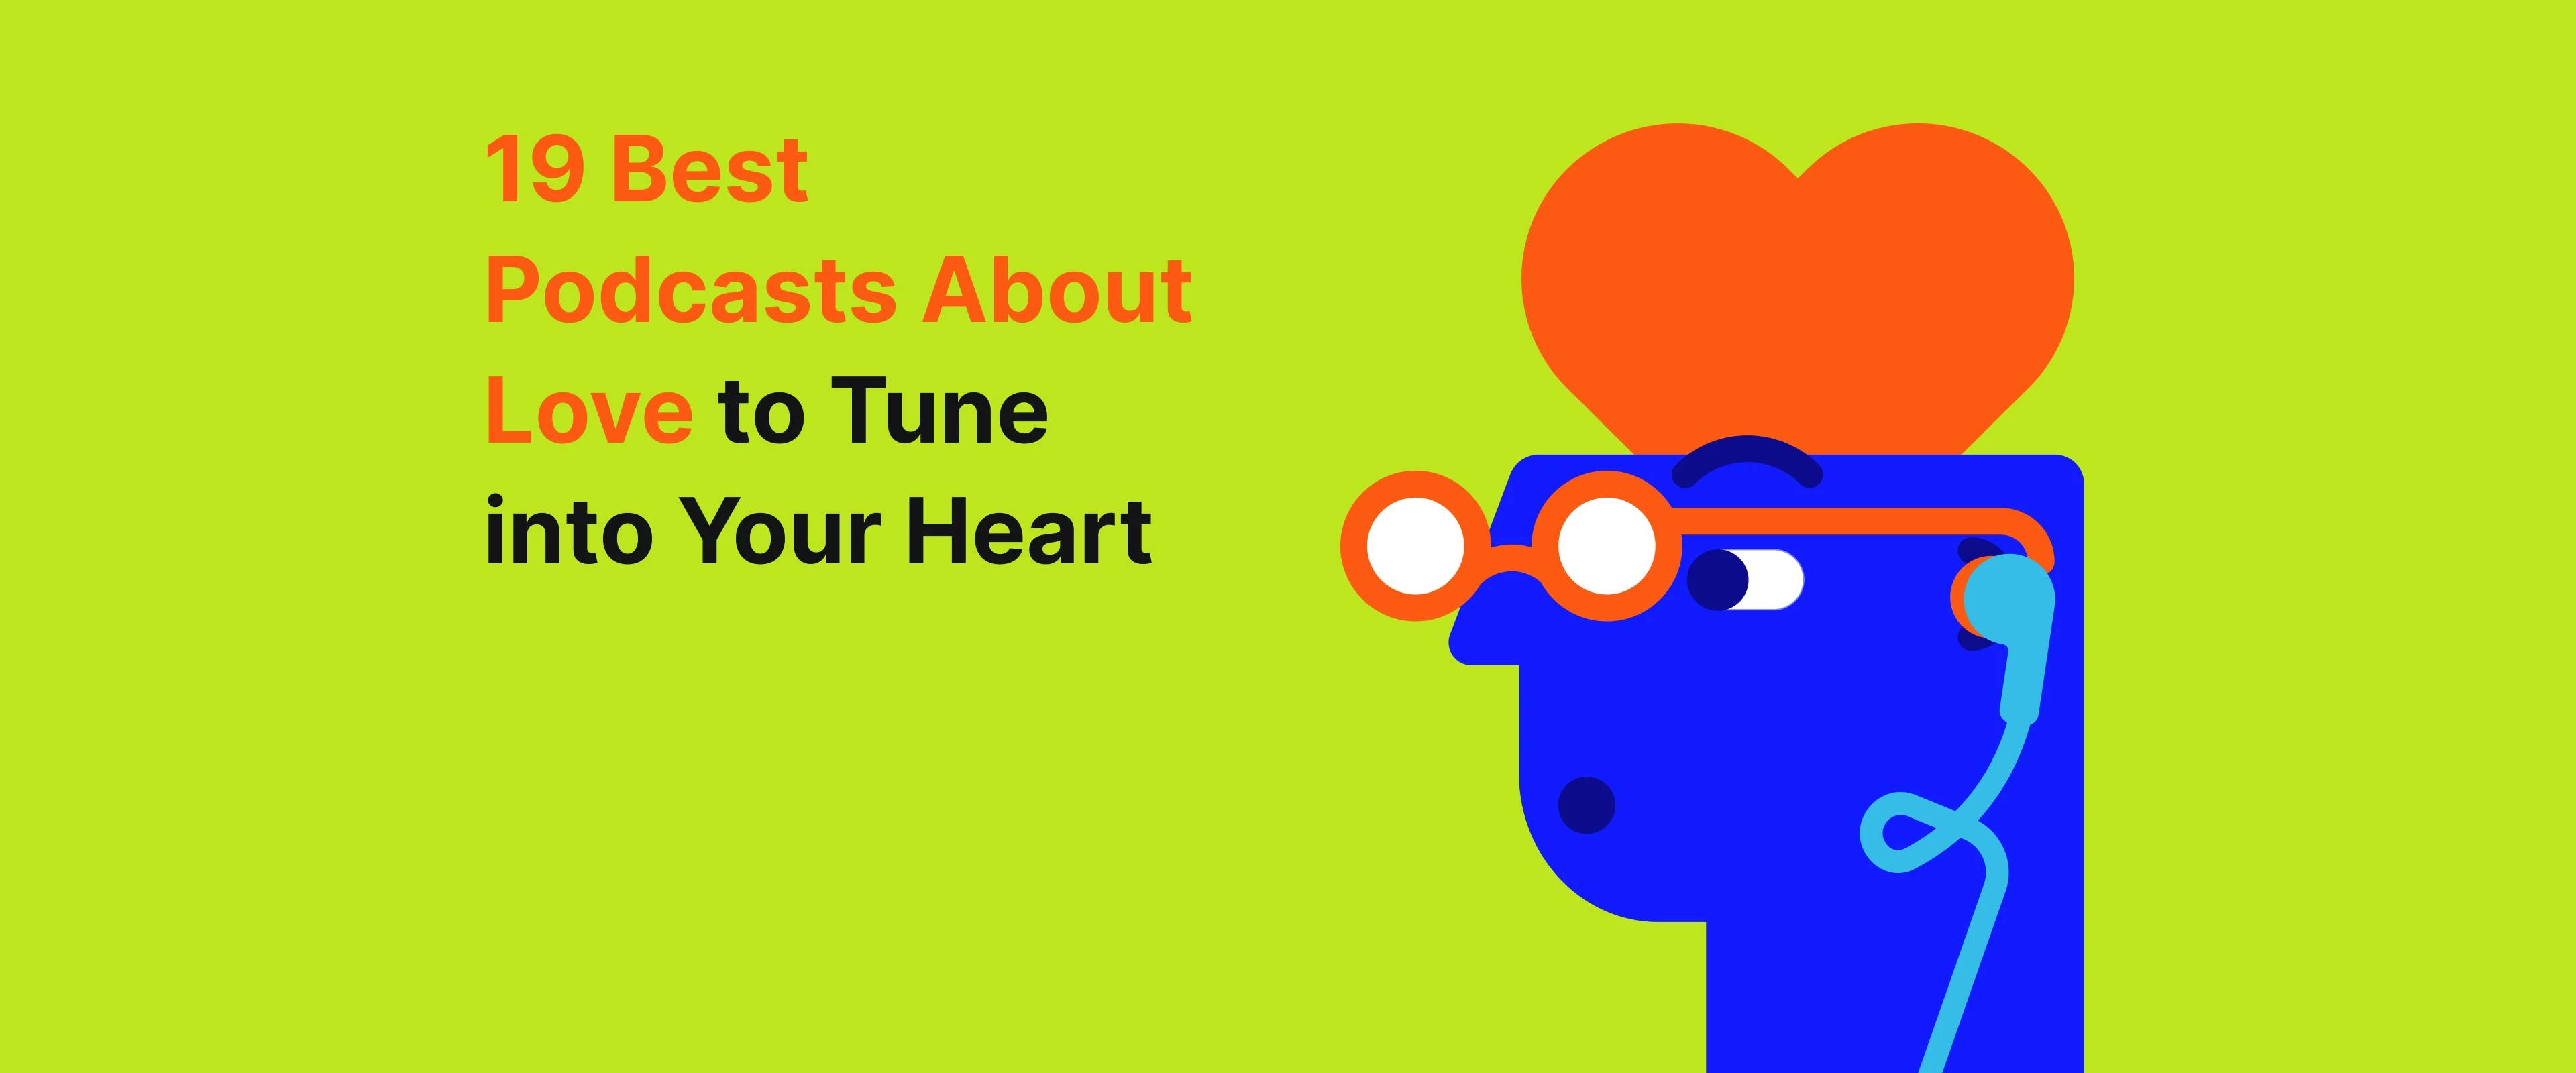 love_is_in_the_air_waves_19_best_podcasts_about_love_to_tune_into_your_heart